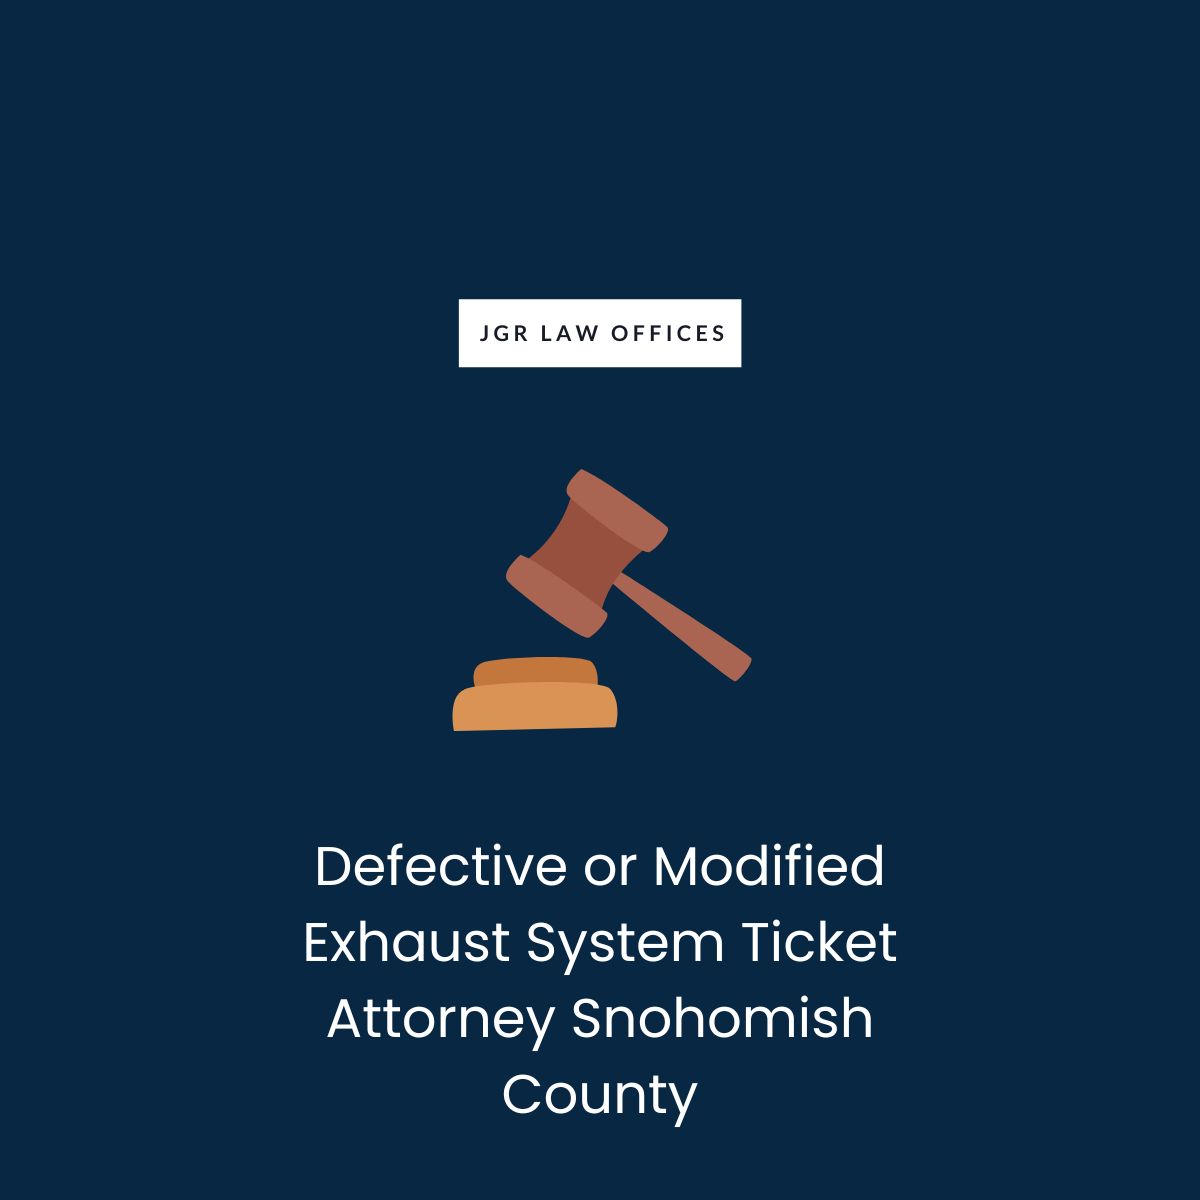 Defective or Modified Exhaust System Ticket Attorney Snohomish County